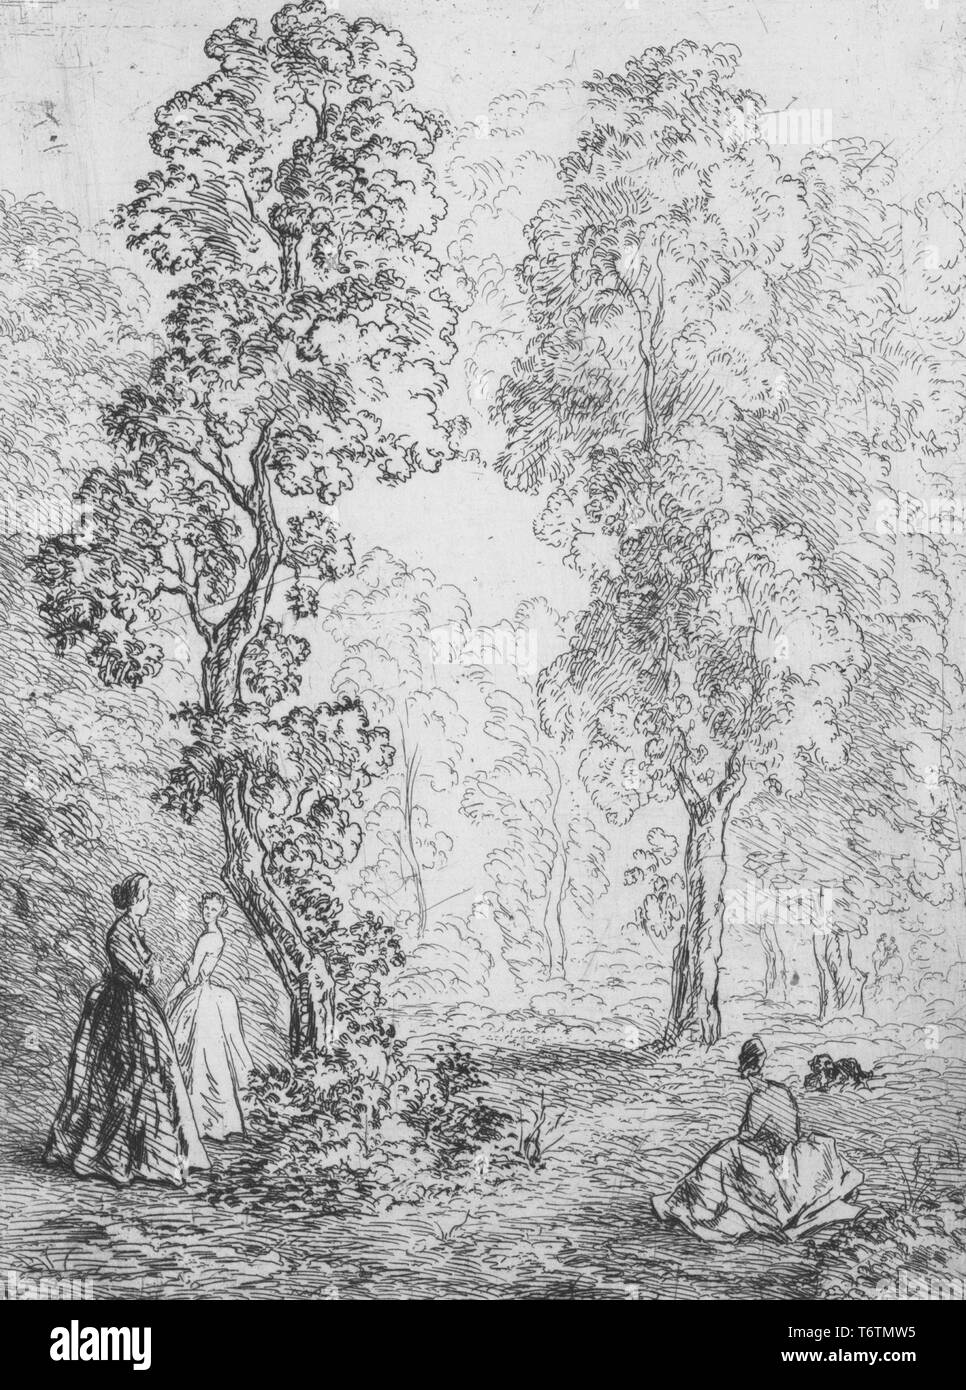 Black and white etching depicting a lightly wooded or forested area, populated with three female figures wearing Victorian dresses, one seated in the right foreground, and two more standing in profile at left; titled 'Essai d'Eau-Forte' (Etching Test); numbered and signed by the illustrator Felix Bracquemond, 1867. From the New York Public Library. () Stock Photo